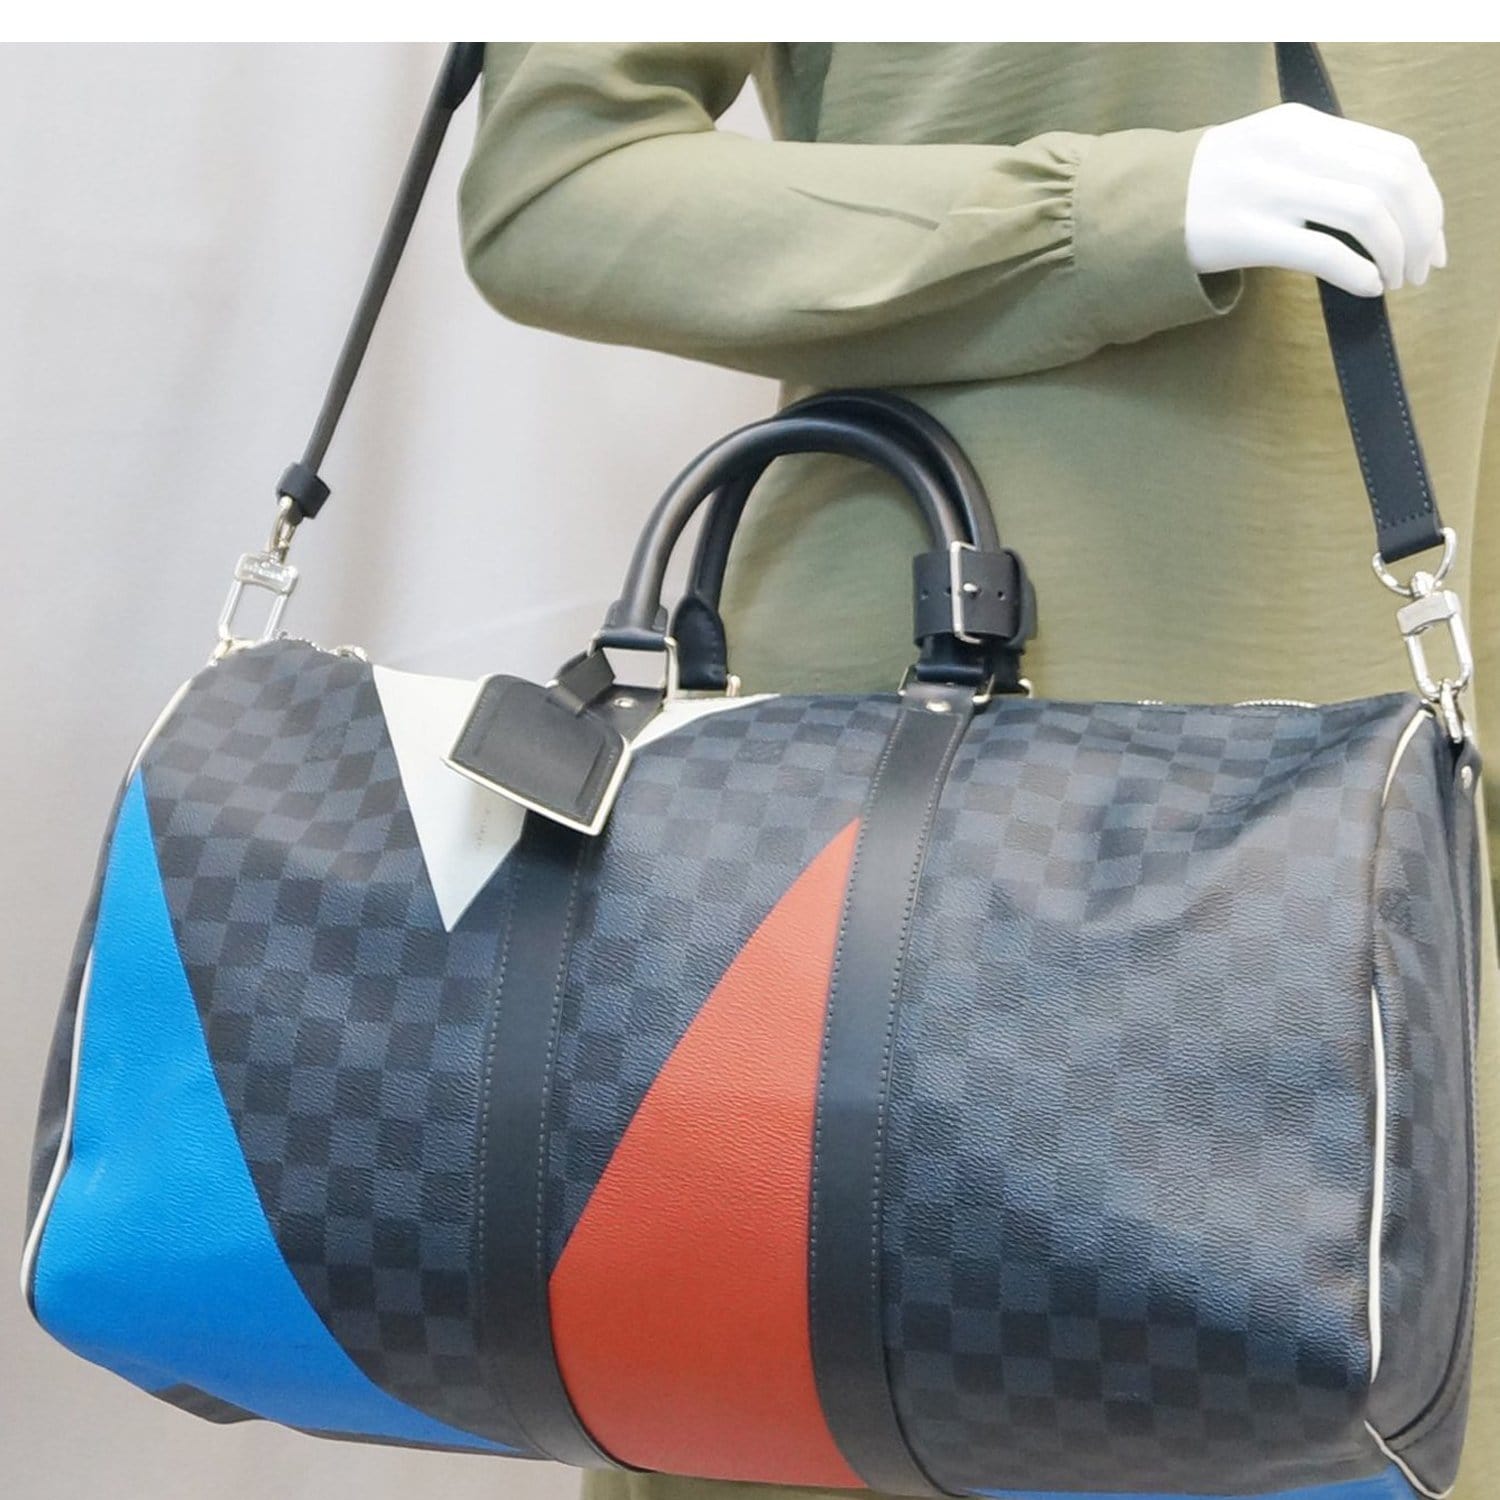 louis vuitton duffle bag with red straps